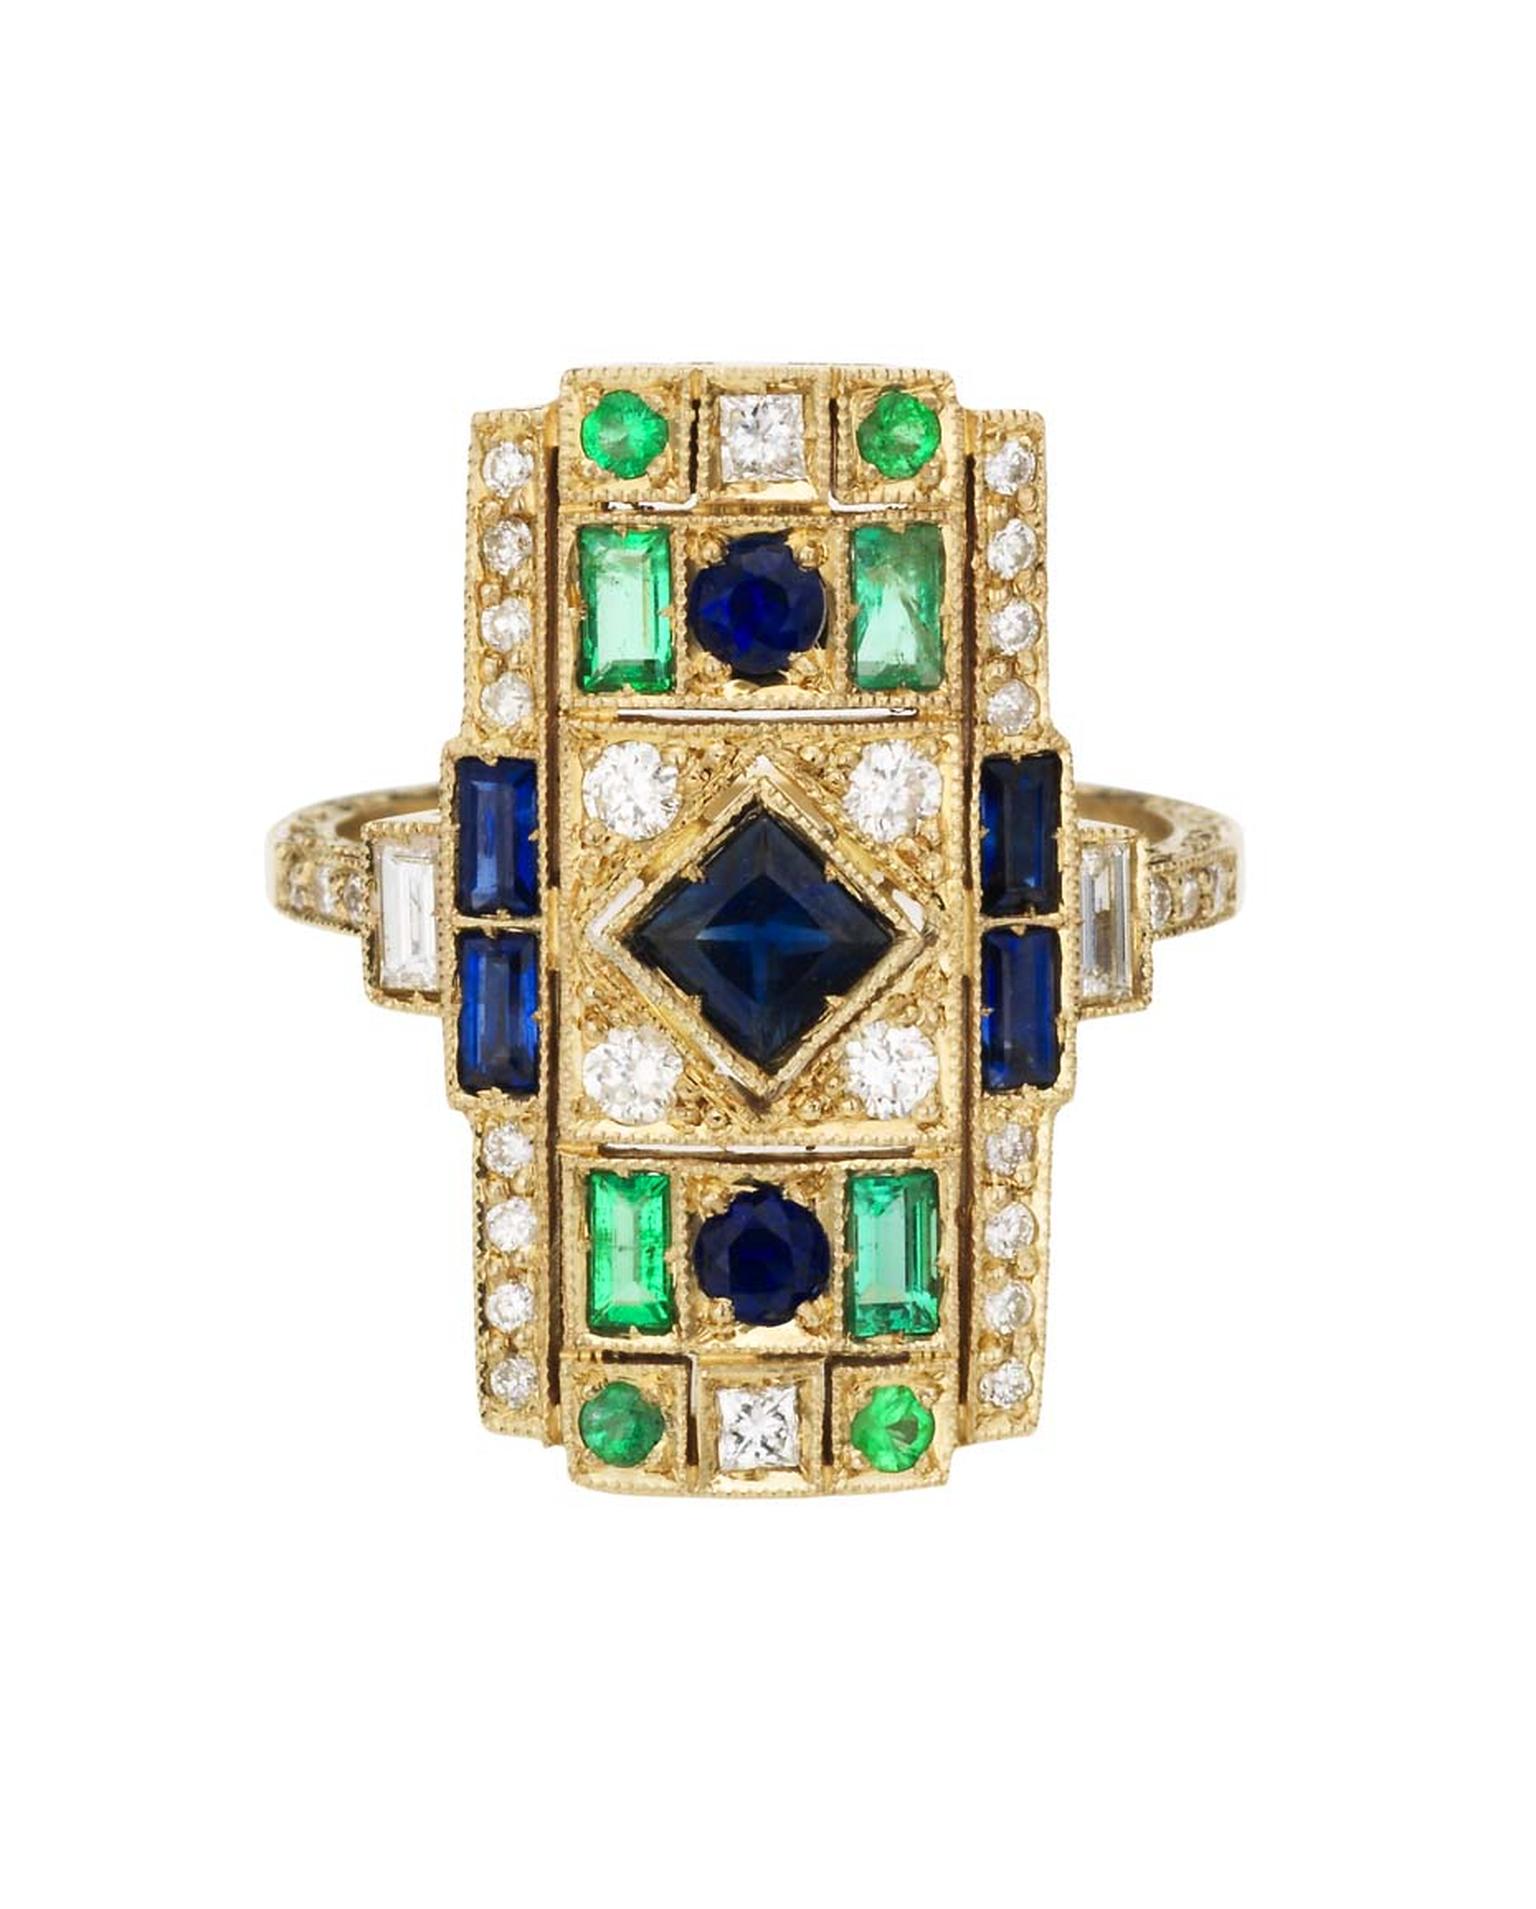 Sabine G Harlequin collection white gold ring with white diamonds, emeralds and sapphires.